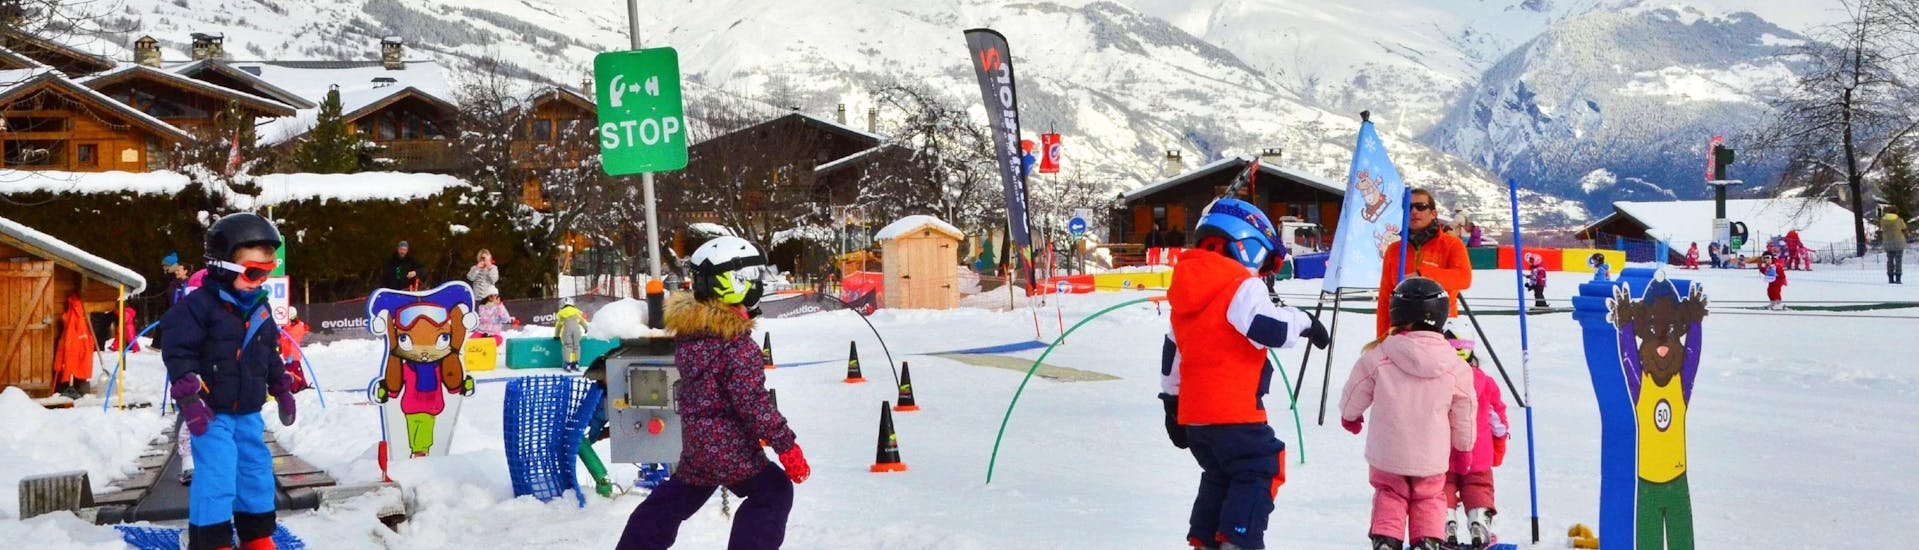 Kids are learning to ski with some games during their Kids Ski Lessons (4-12 y.) for Beginners with the ski school Evolution 2 La Plagne Montchavin - Les Coches.